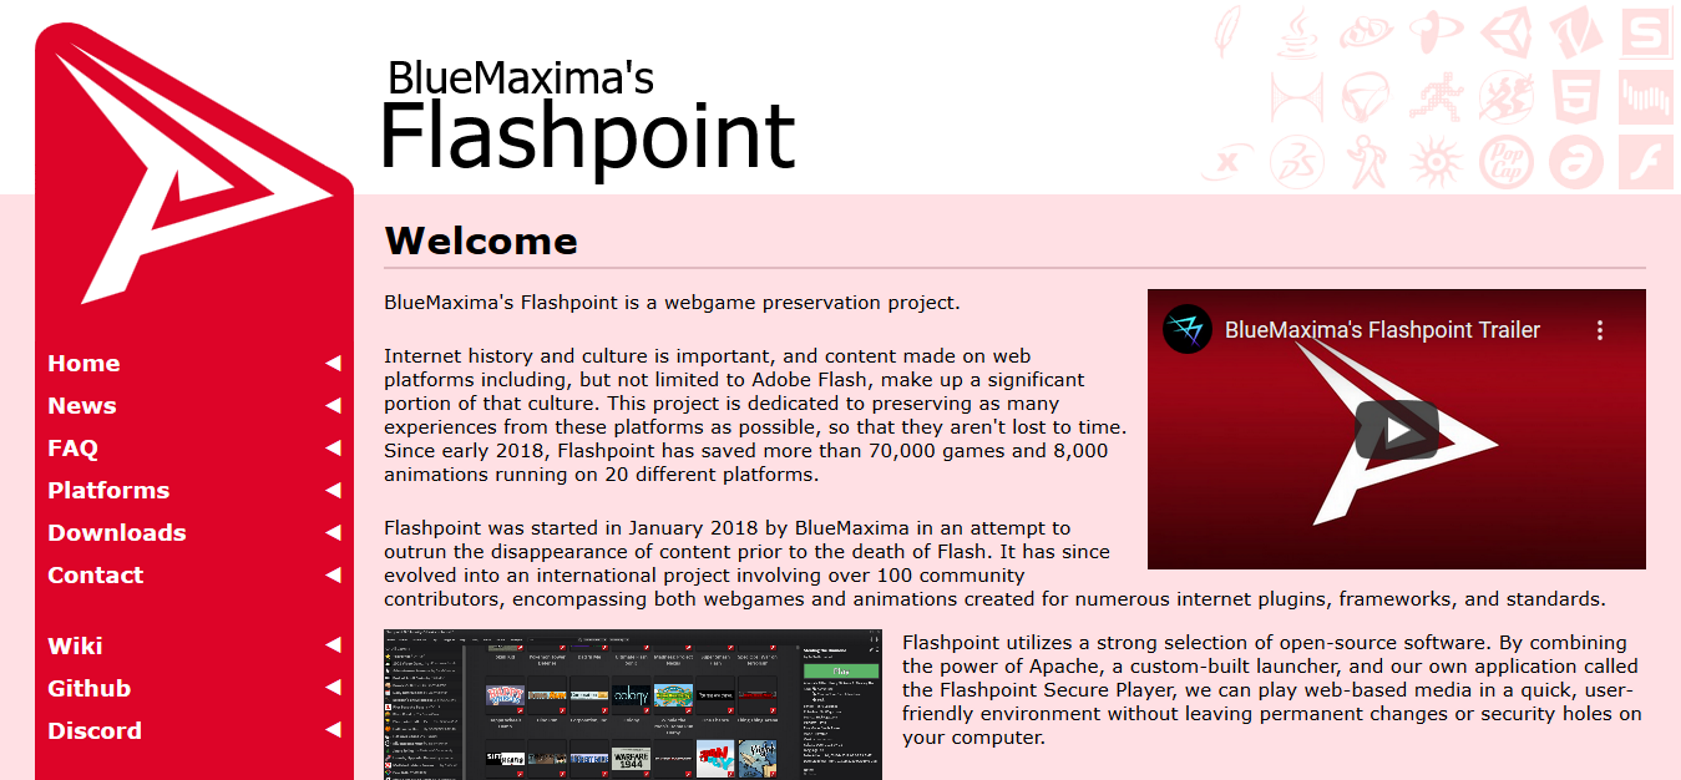 A screenshot of BlueMaxima's Flashpoint home page